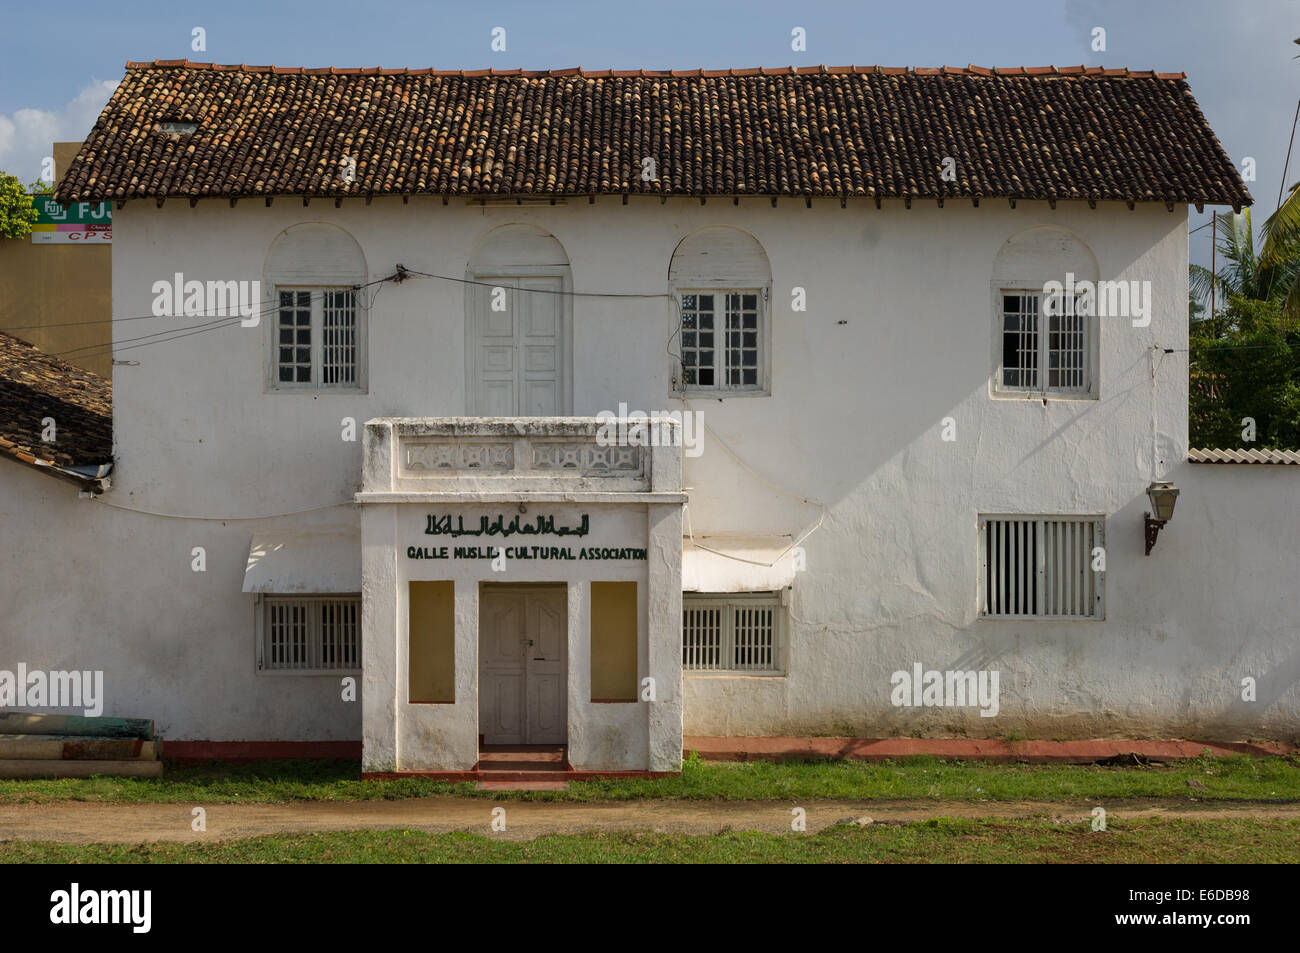 Colonial era architecture of the Galle Muslim Cultural Association, Galle Fort, Galle, Sri Lanka Stock Photo